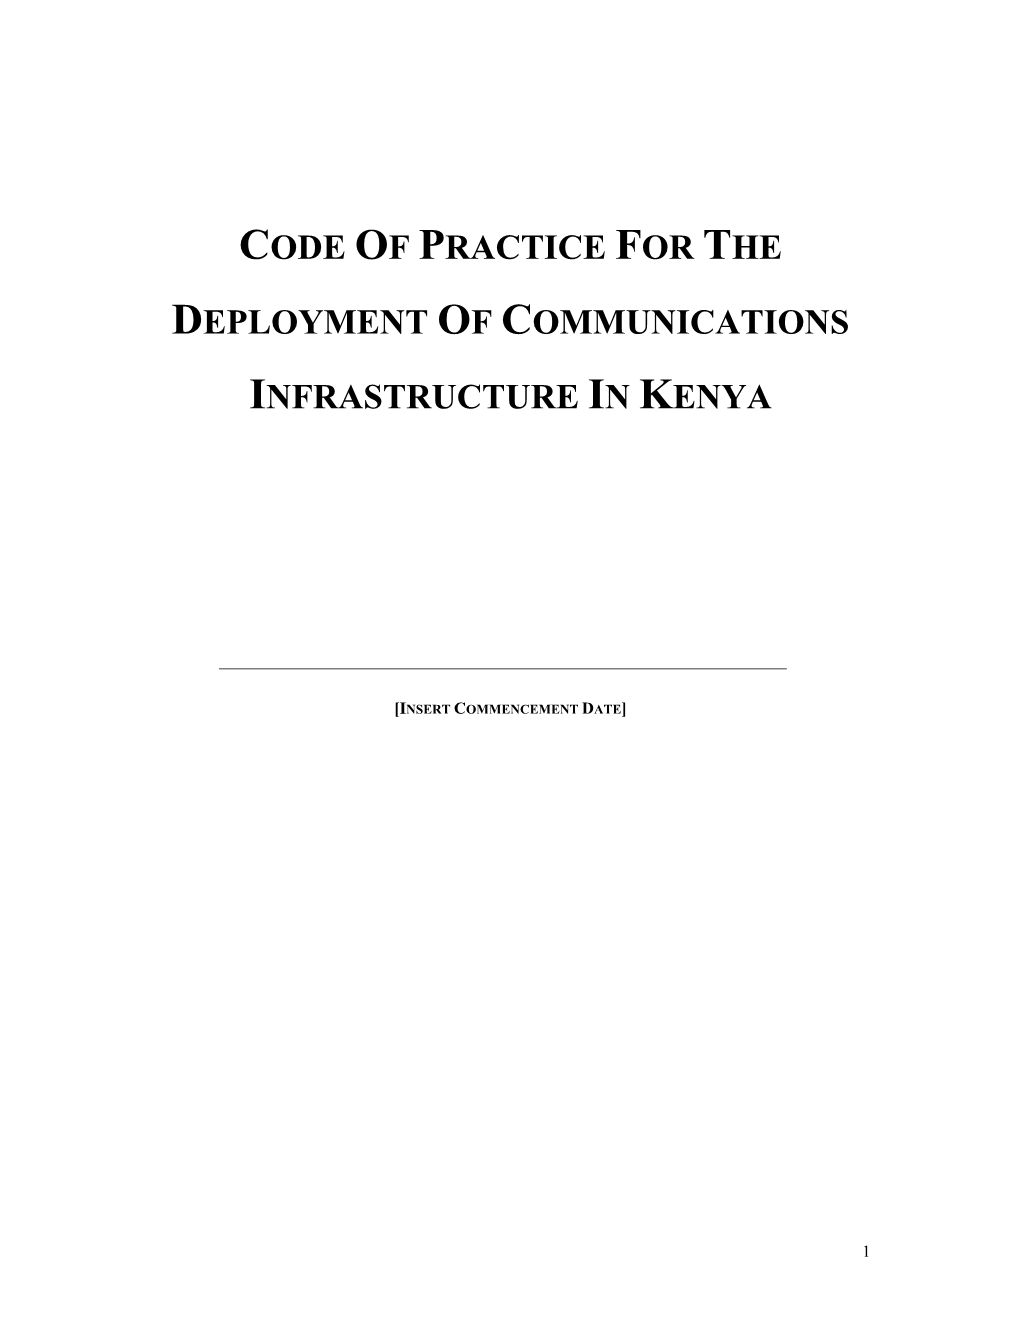 Code of Practice for the Deployment of Communications Infrastructure in Kenyapdfsize 148 Kb